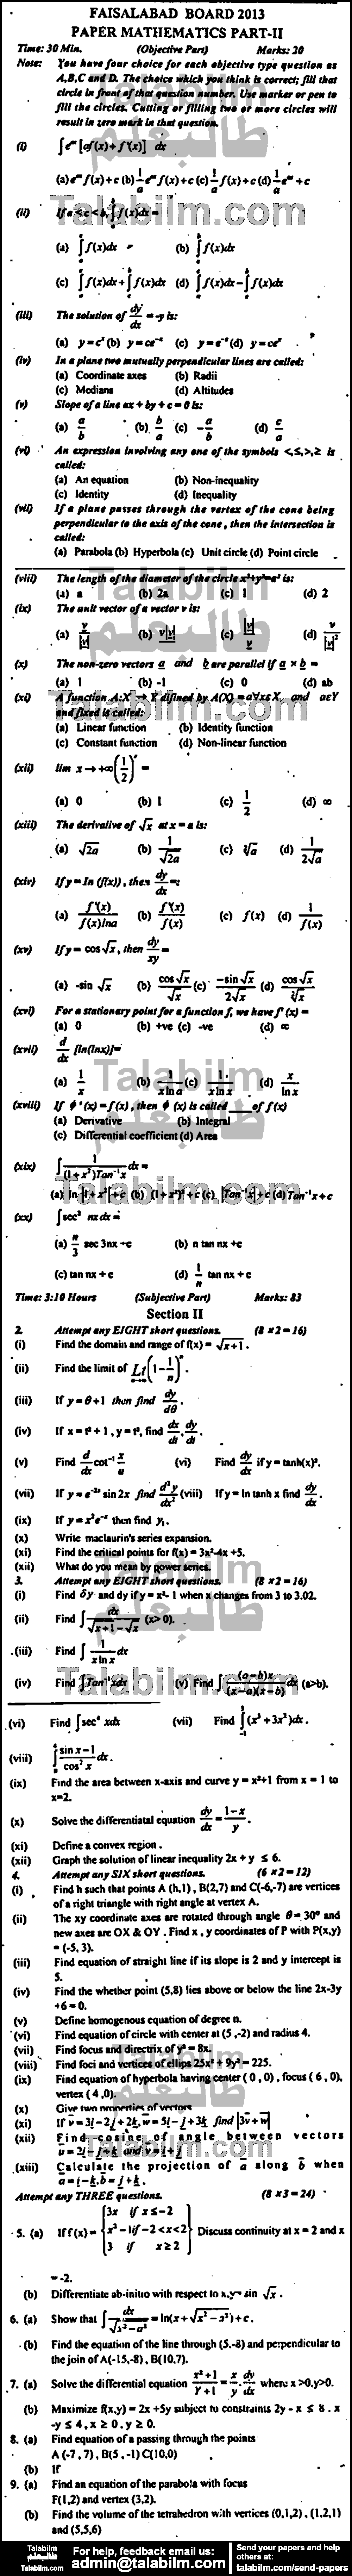 Math 0 past paper for Group-II 2013